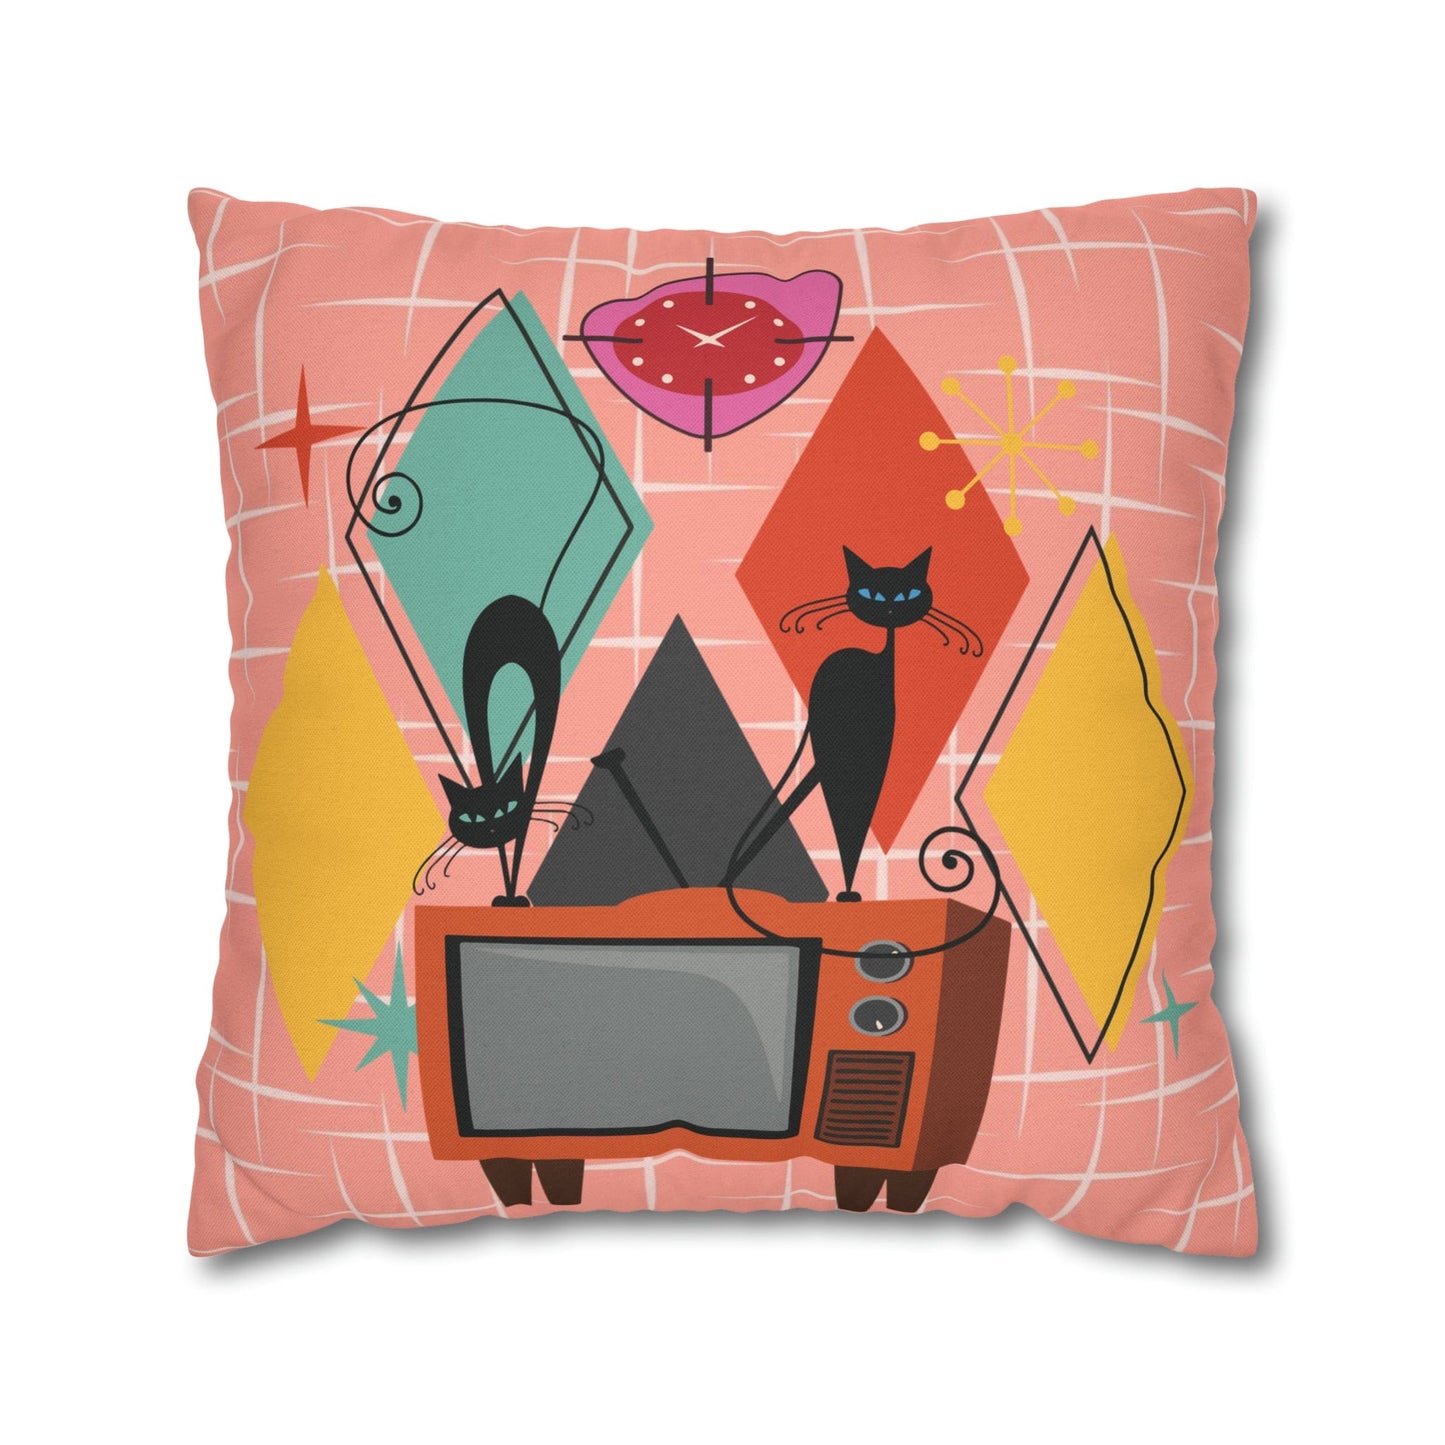 Kate McEnroe New York Atomic Cat Retro TV Pillow Cover, Mid Century Modern Orange, Teal, Yellow, Pink Cushion Covers, MCM Pillow Case Throw Pillow Covers 20" × 20" 14505531541008926429